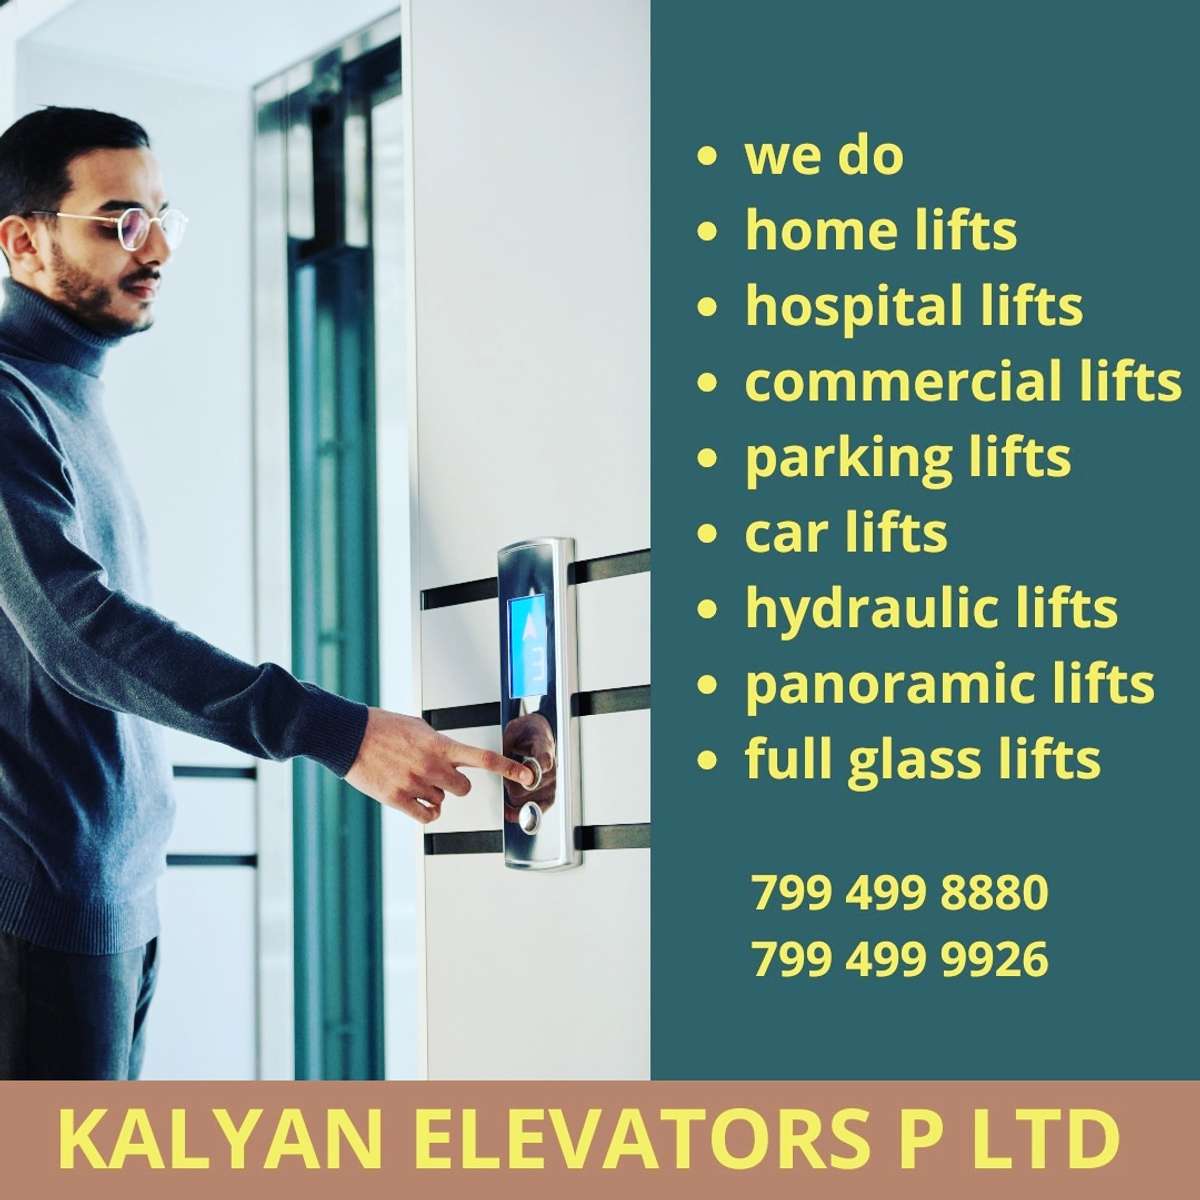 Kalyan Home Elevators offers the long-awaited solution to vertical mobility within homes at affordable prices and easy-to-use features. Our customized and aesthetically designed home lifts are easily installable in preexisting homes as well as houses under construction, and help you relieve the headache of climbing. More details:- contact us

we do all kind of :-
Home Lifts
Hospital Lifts
Capsule Lifts
Commercial Lifts
Customised Passenger Lifts
Car Lifts
Parking Lifts